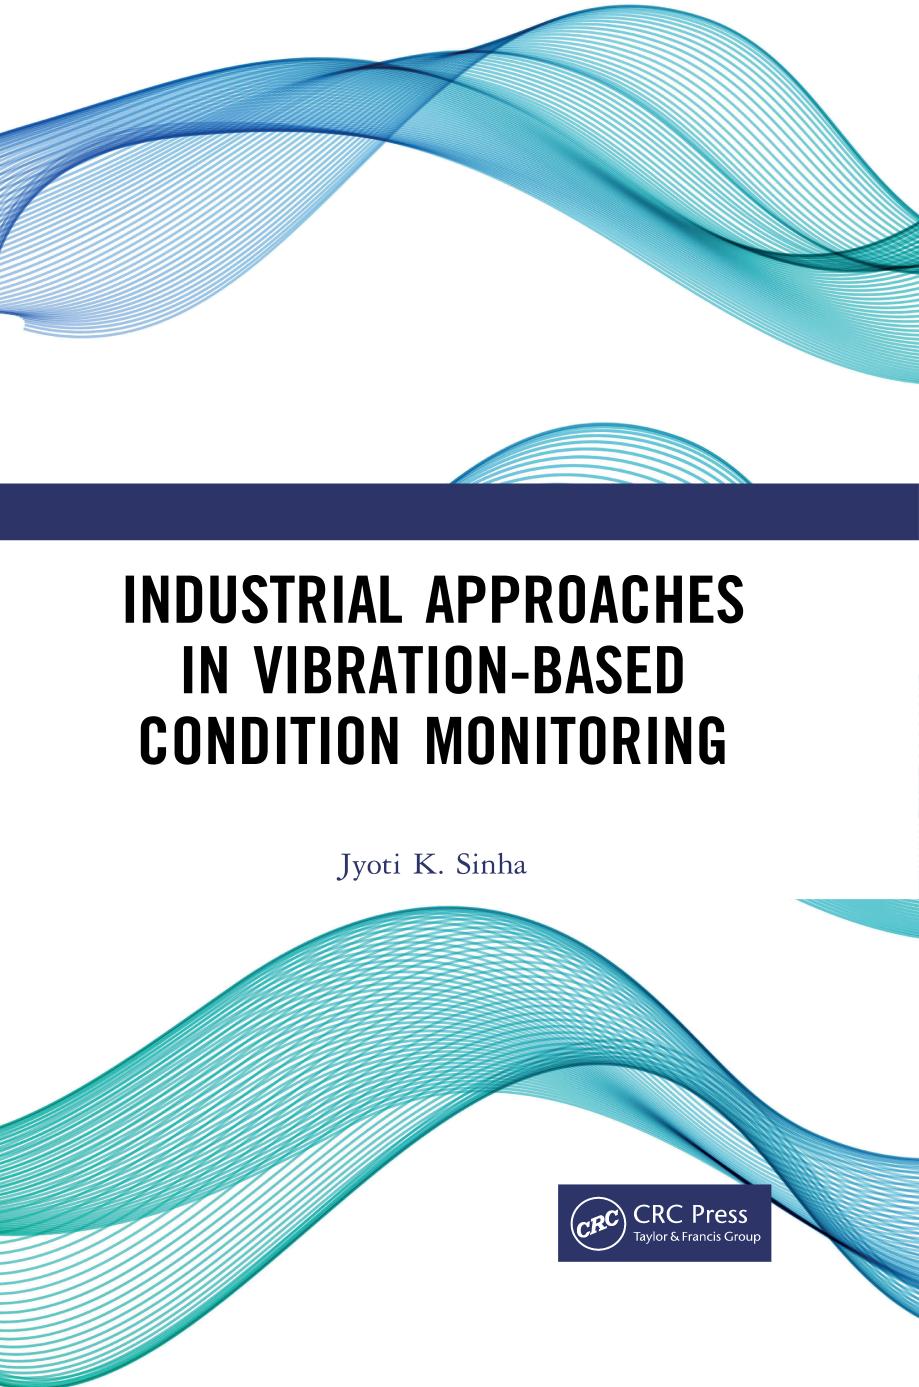 Industrial Approaches in Vibration-Based Condition Monitoring